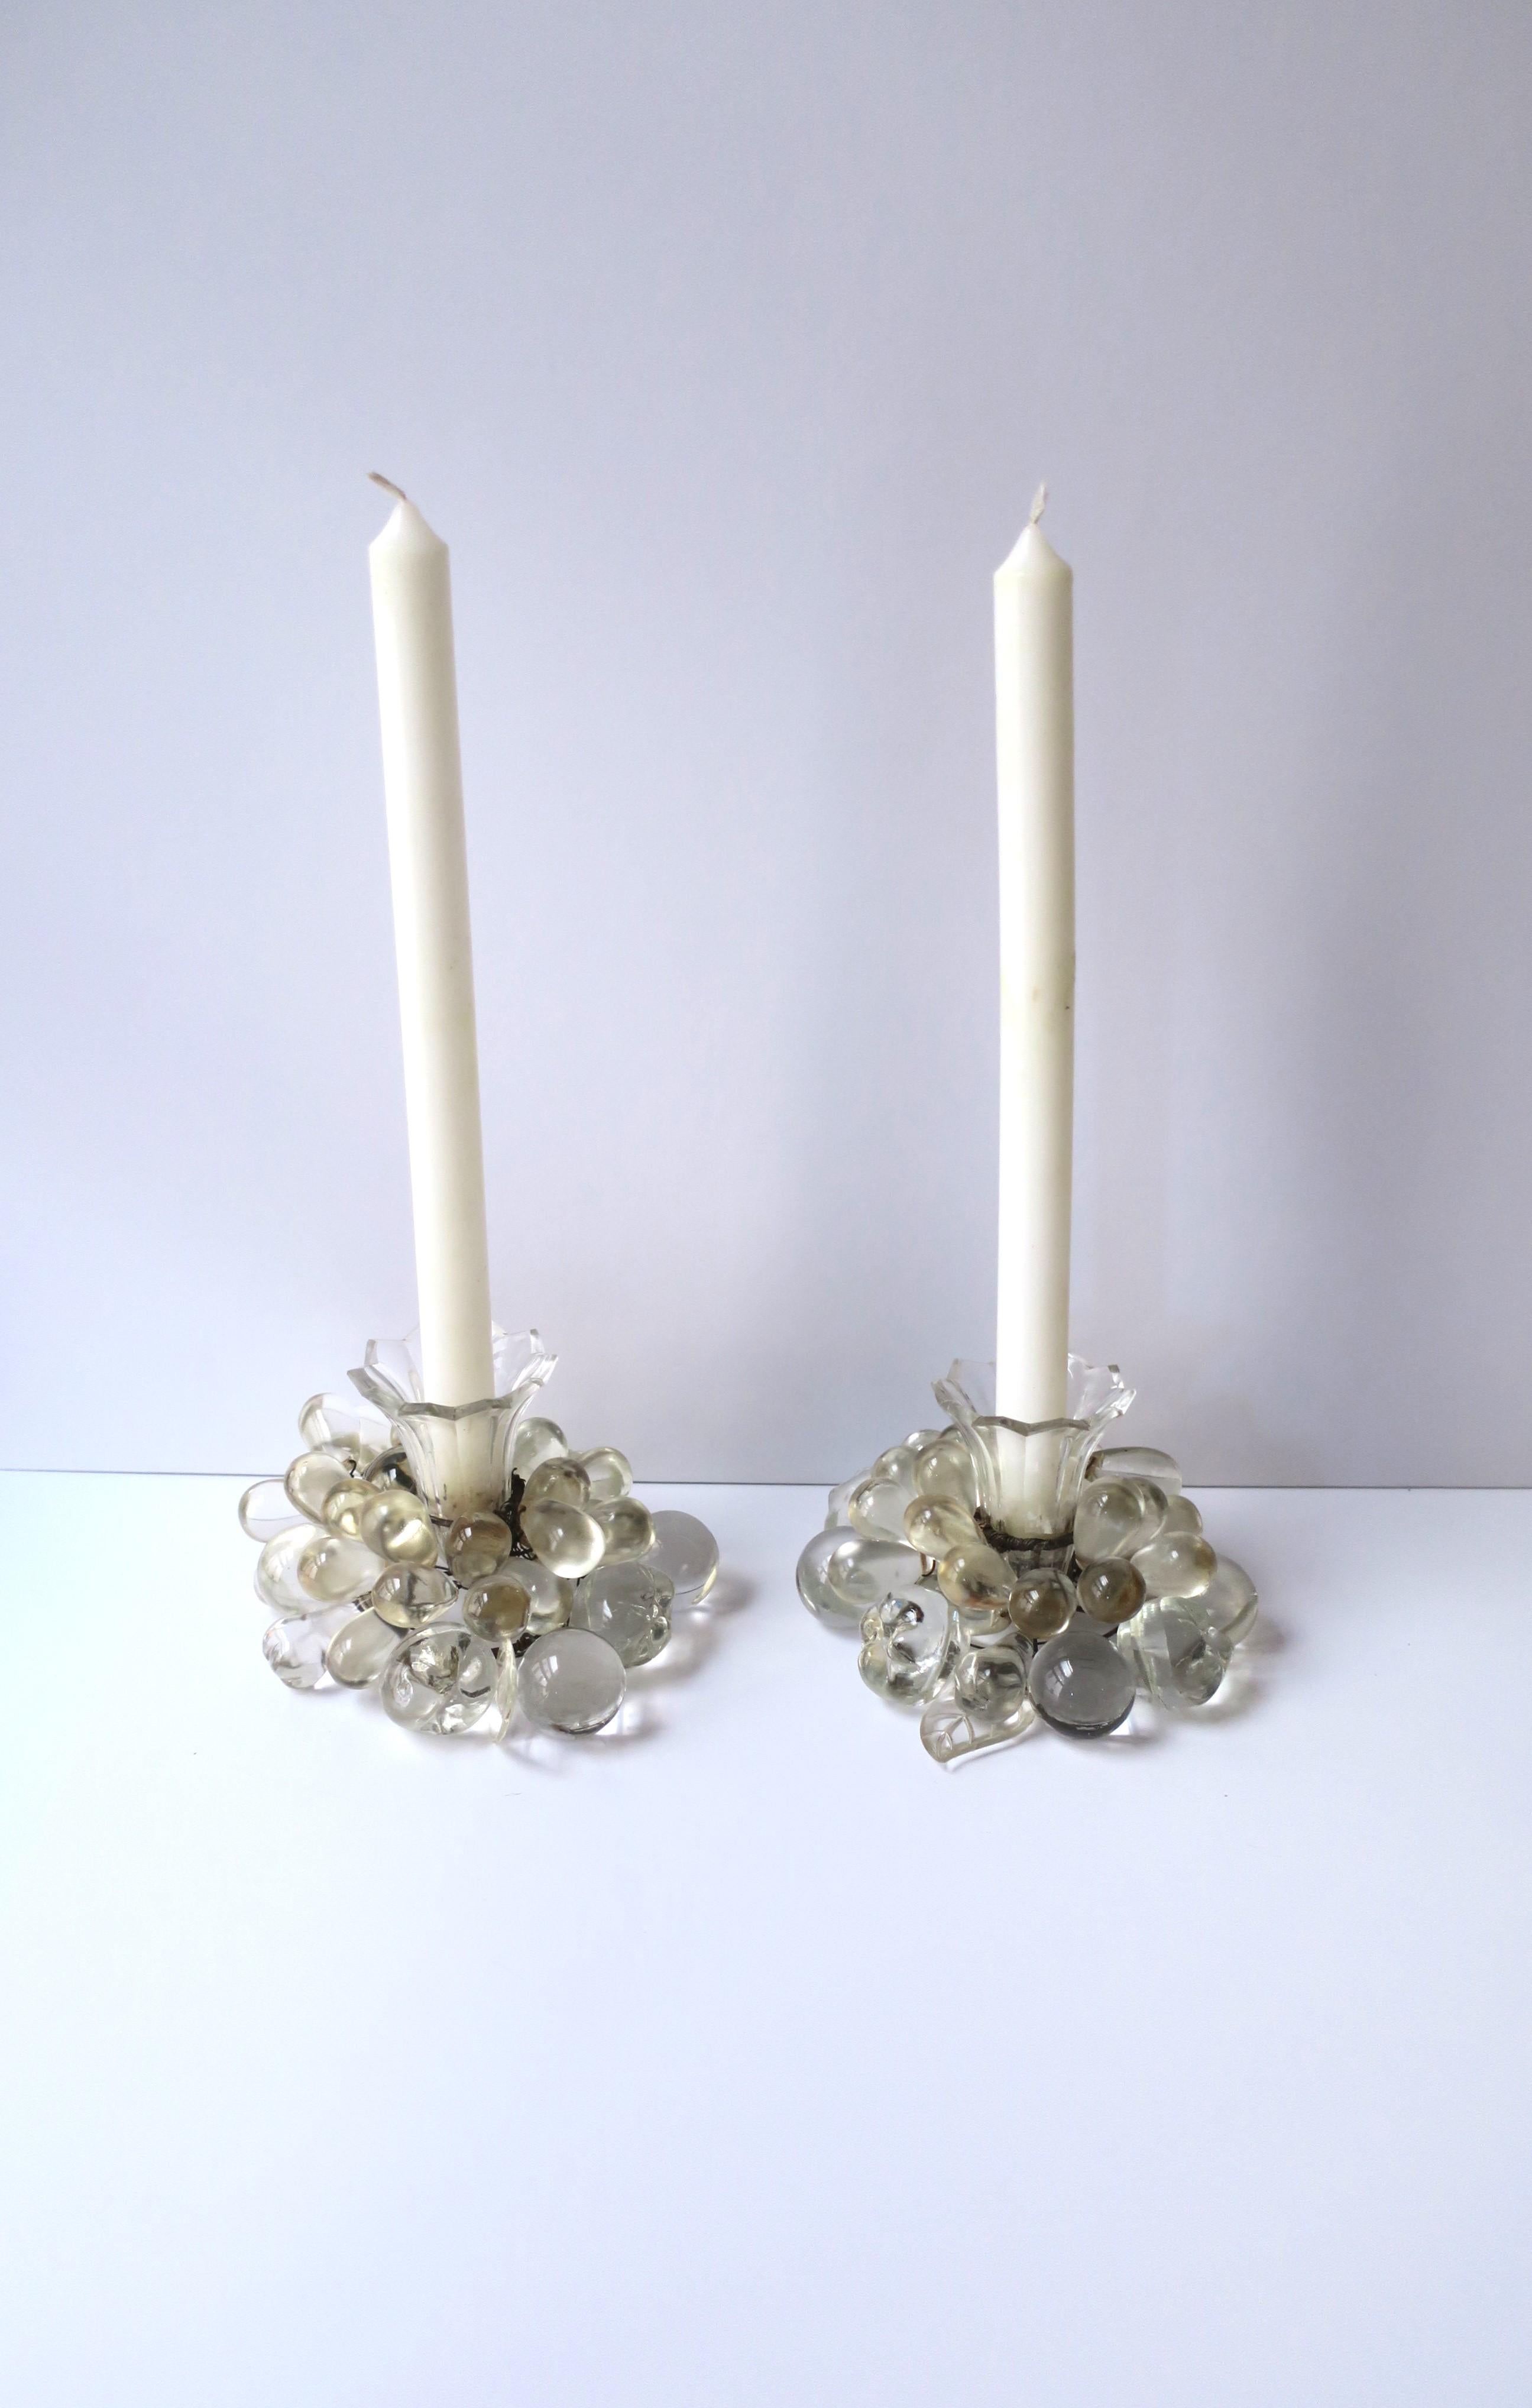 A pair of crystal fruit and leaf candlestick holders, Art Deco period, circa early-20th century, Czechoslovakia. Pair encompass crystal grapes, other fruits, and leaves, with cut crystal candle holder. A beautiful set for dining, entertaining,